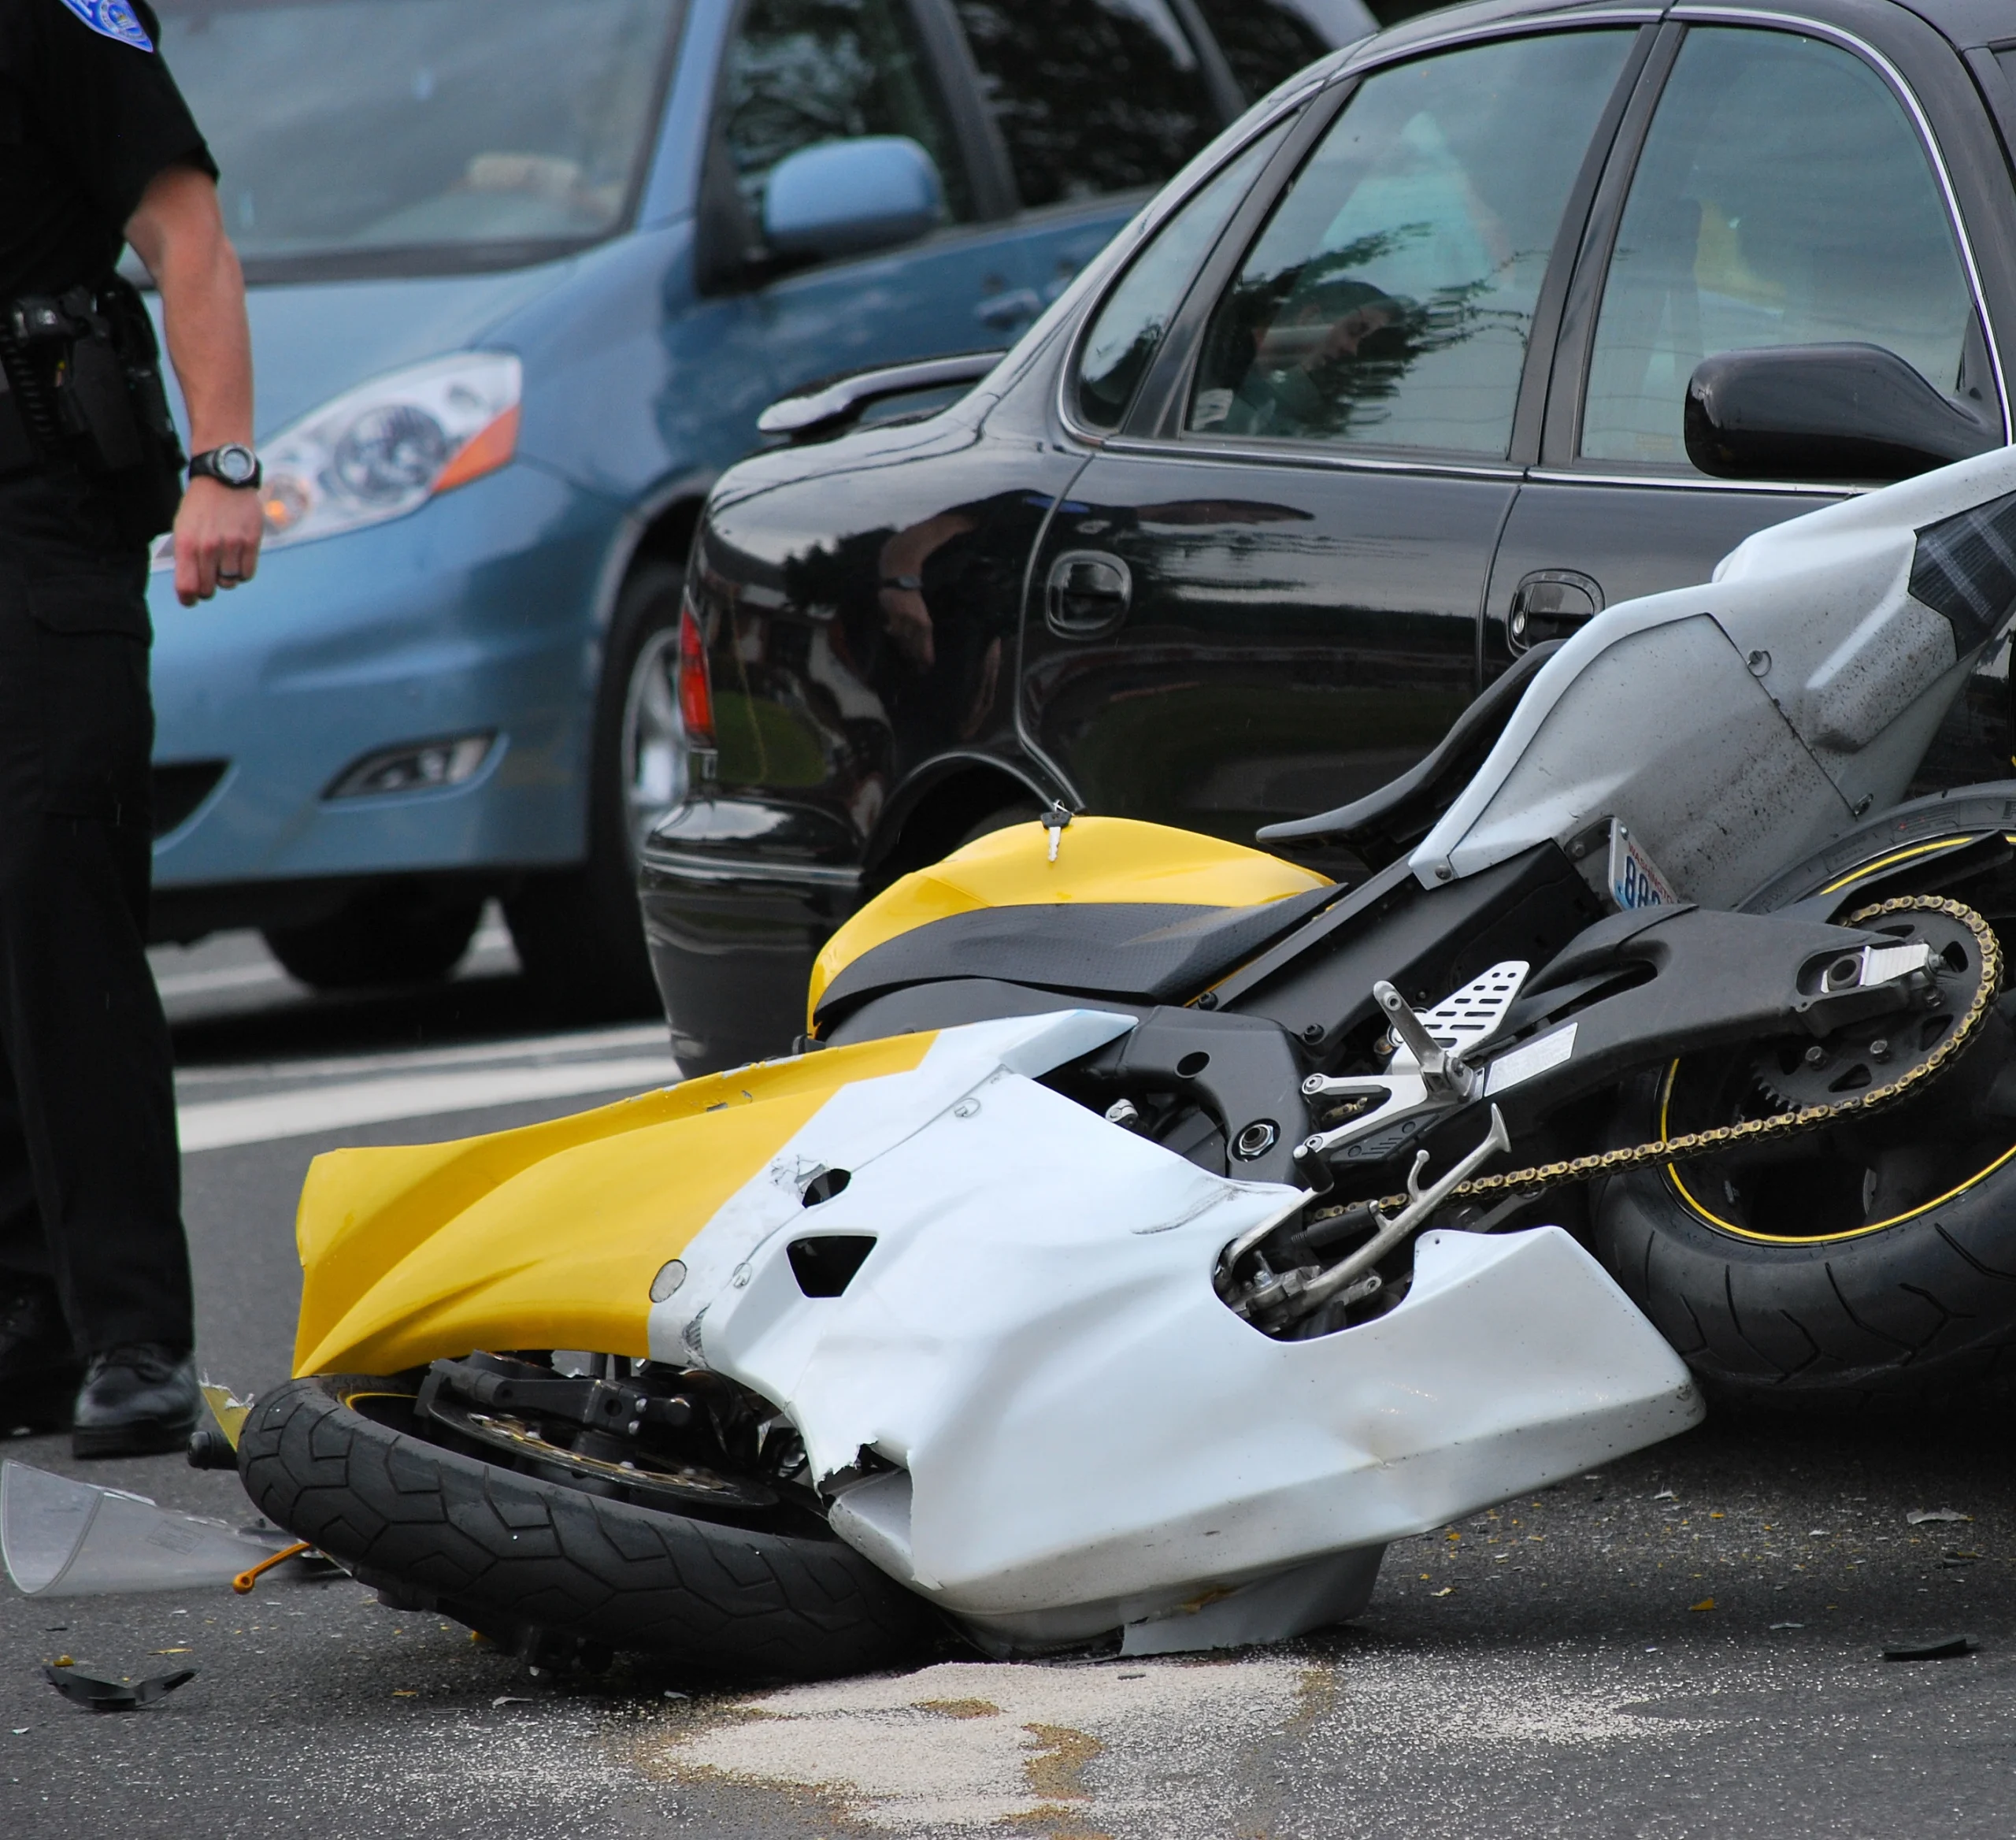 Indianapolis Rear-end Motorcycle Accident Lawyer